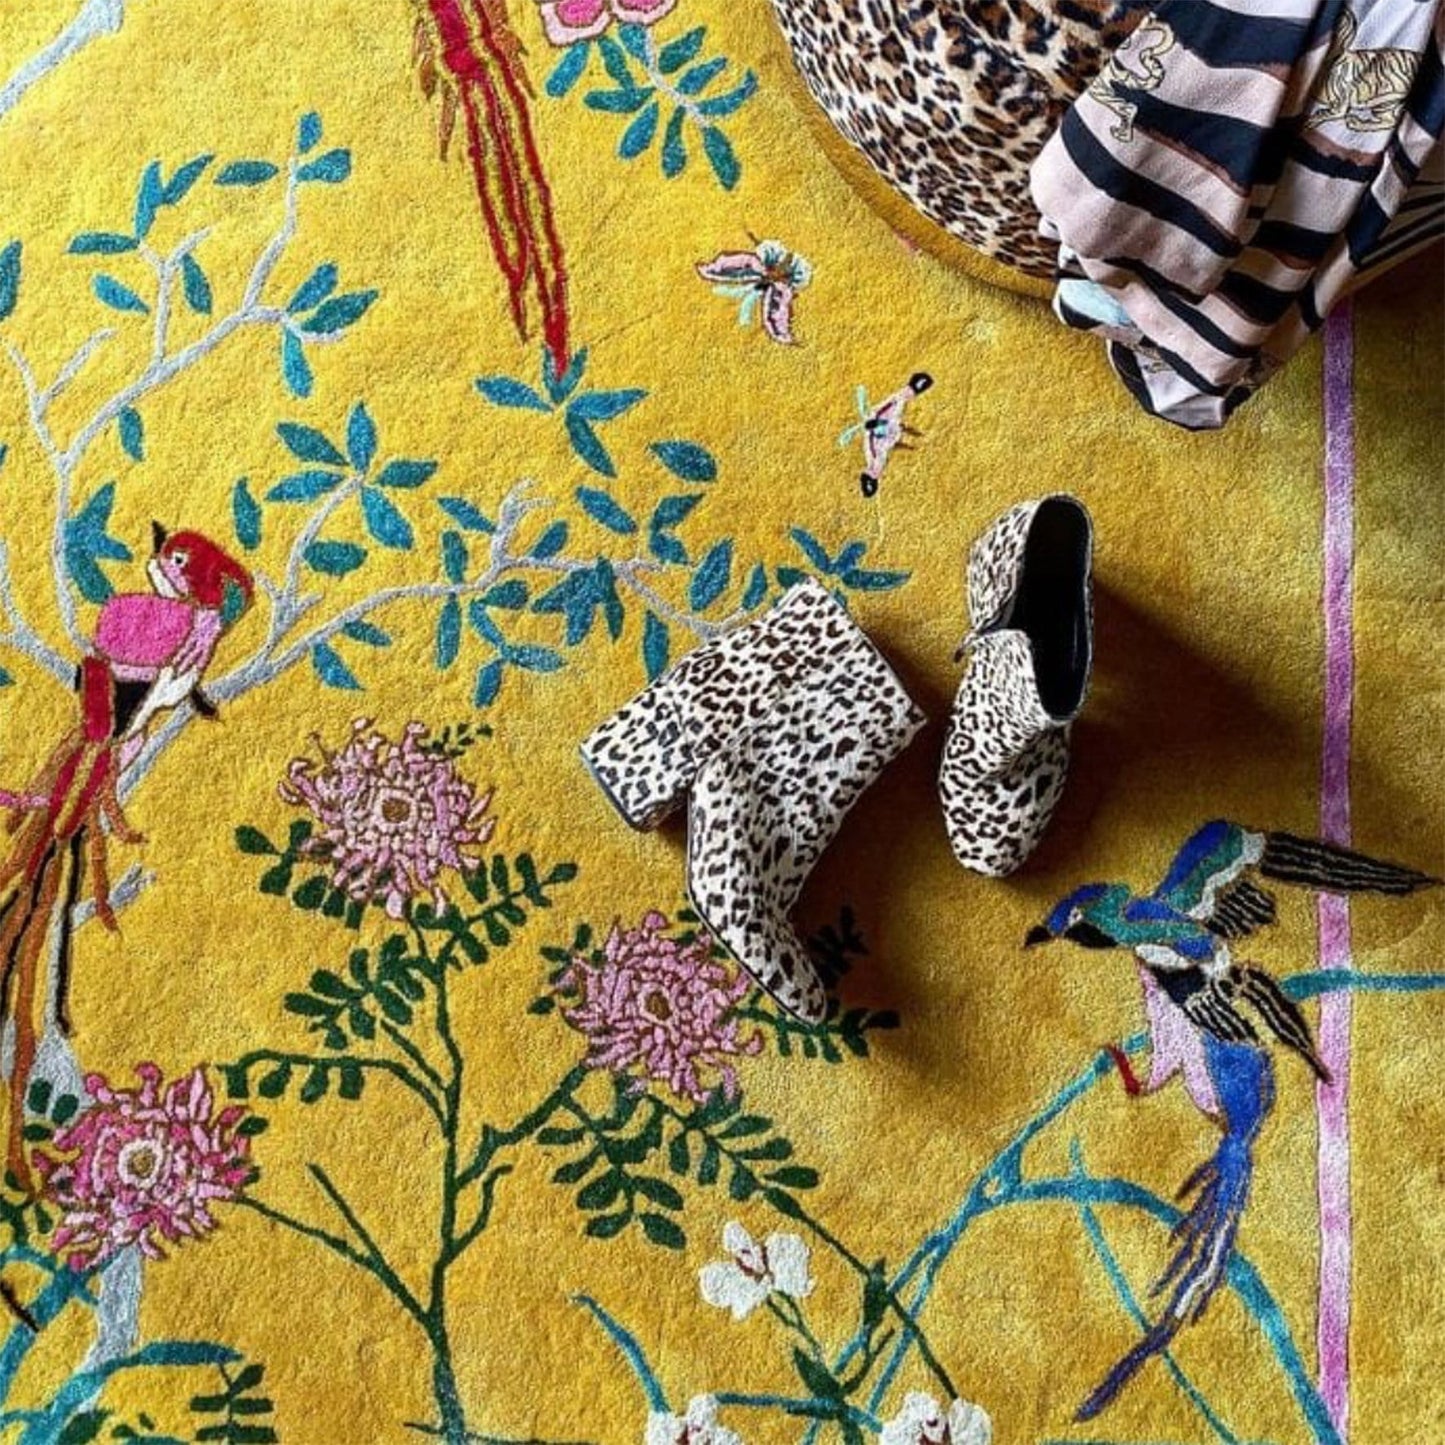 Wendy Morrison Birdsong yellow rug with a close up of animal print ankle boots lying on the rug